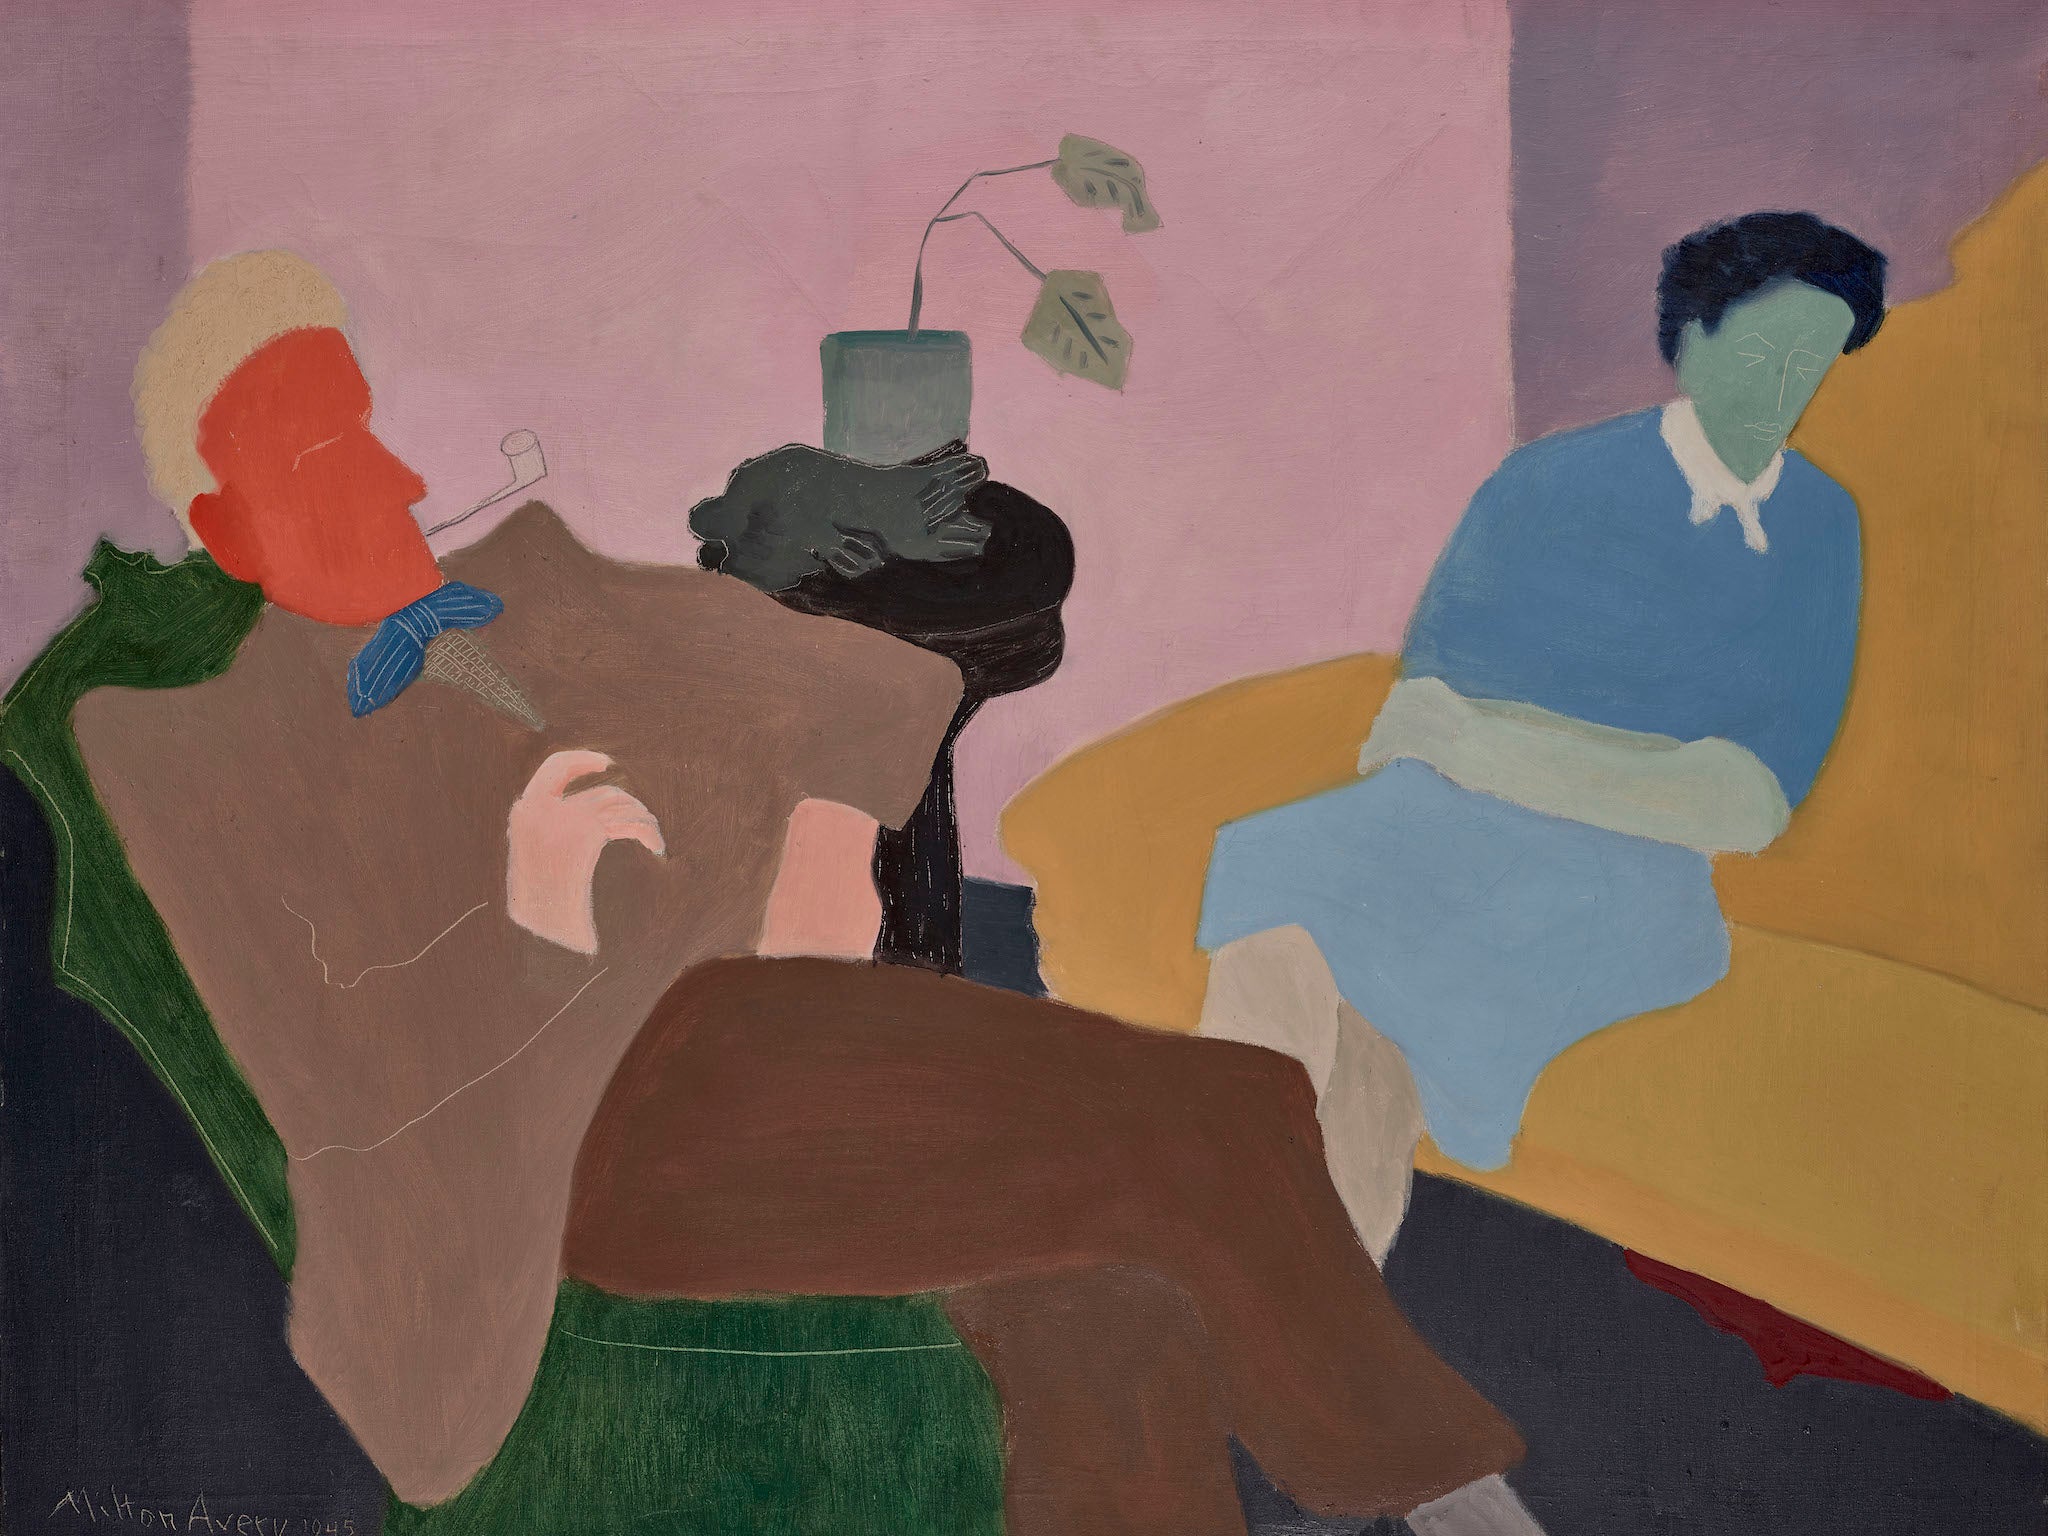 Milton Avery, ‘Husband and Wife’, 1945